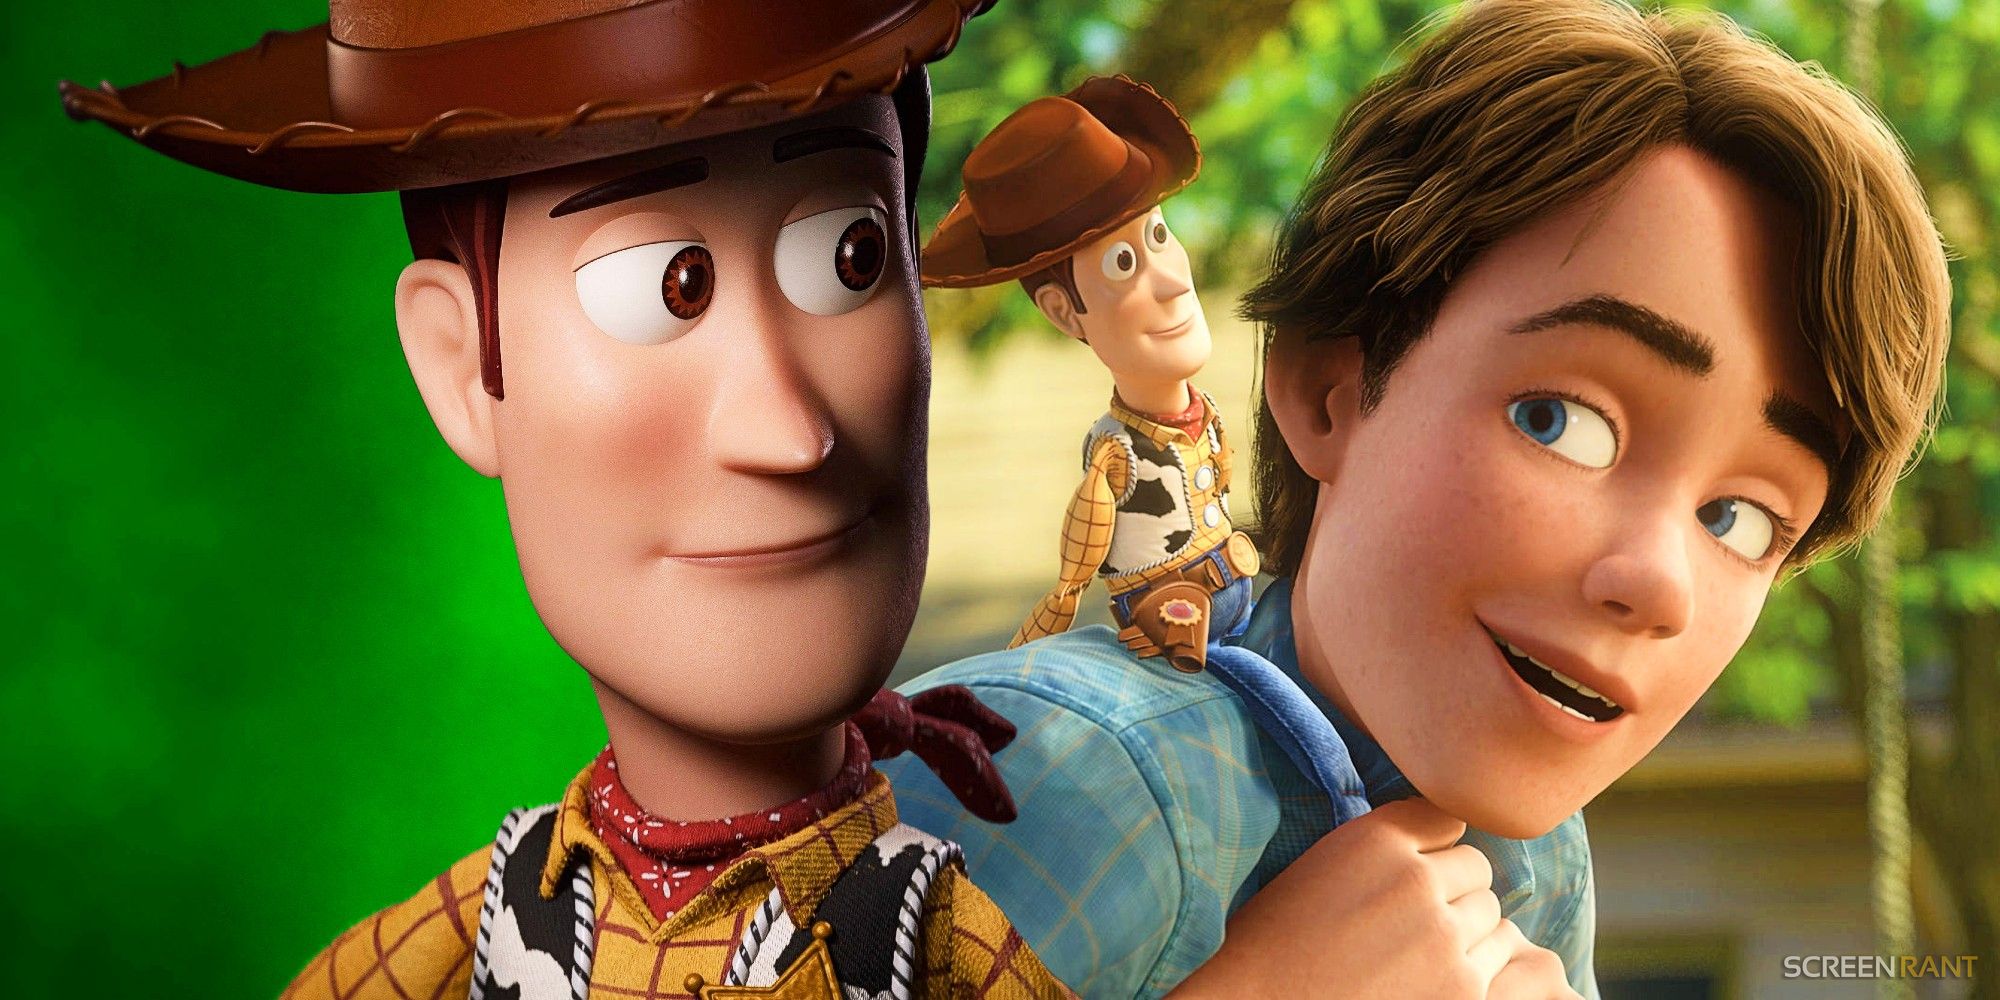 Woody from Toy Story 4 and Andy carrying Woody in Toy Story 3